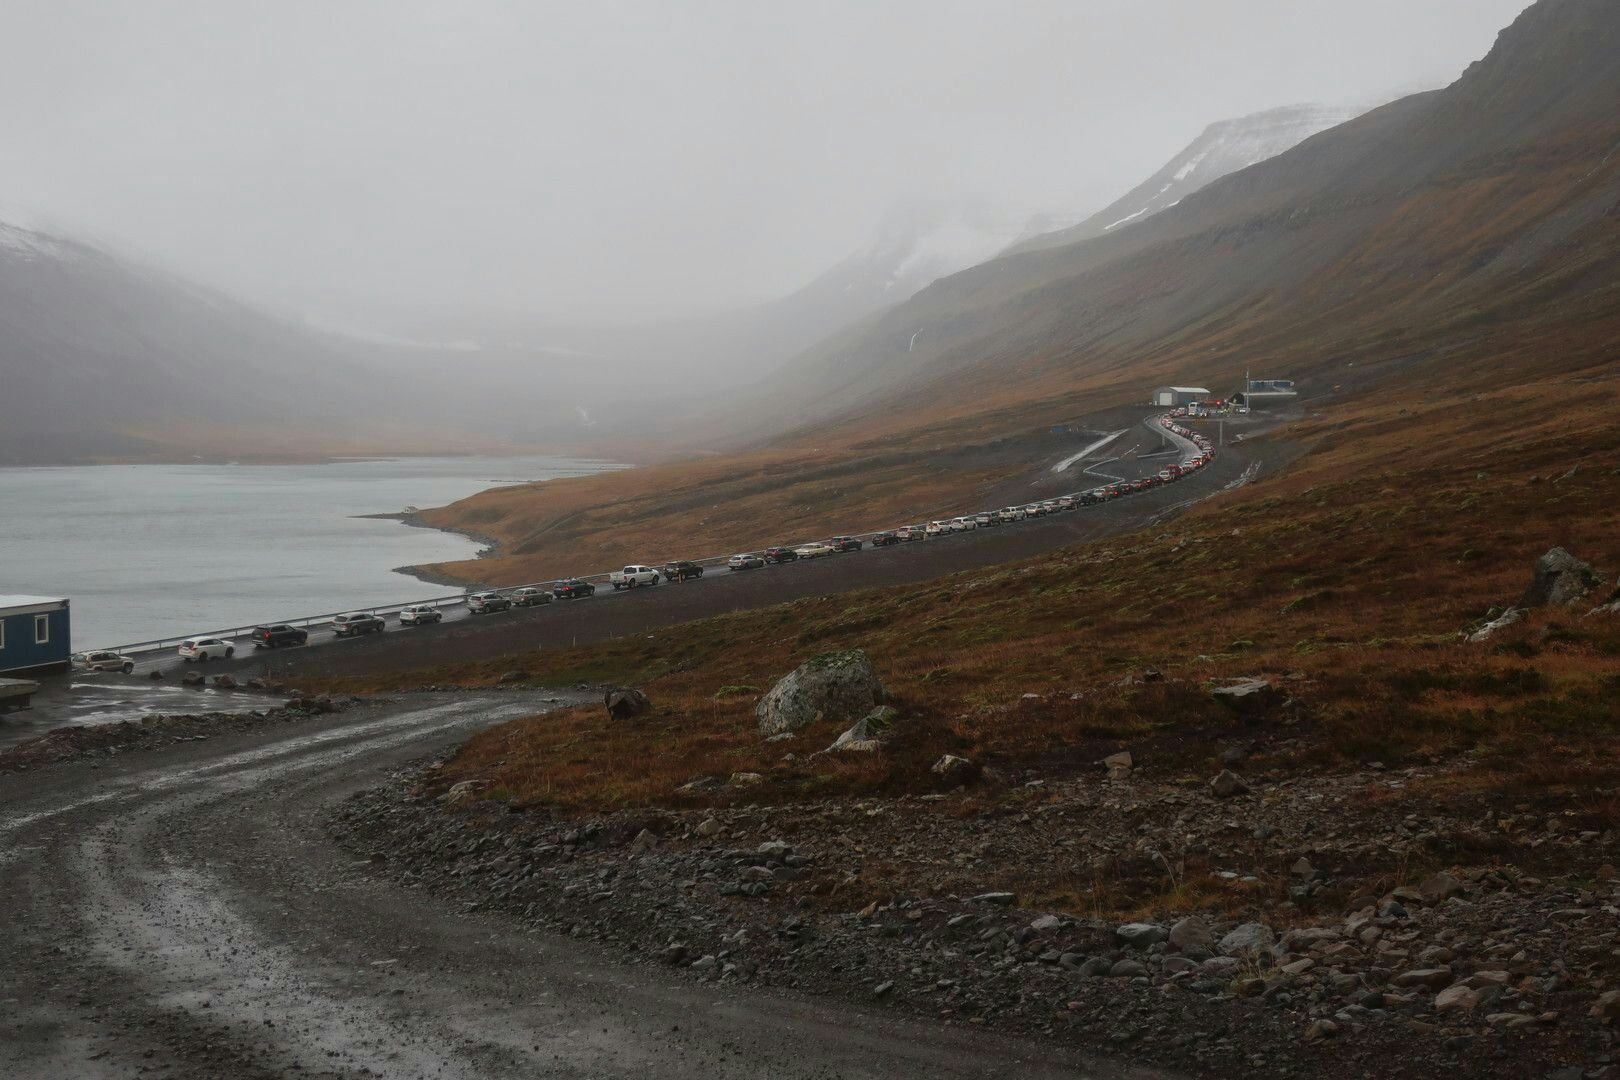 A line of cars on a road besides a misty mountain and a lake